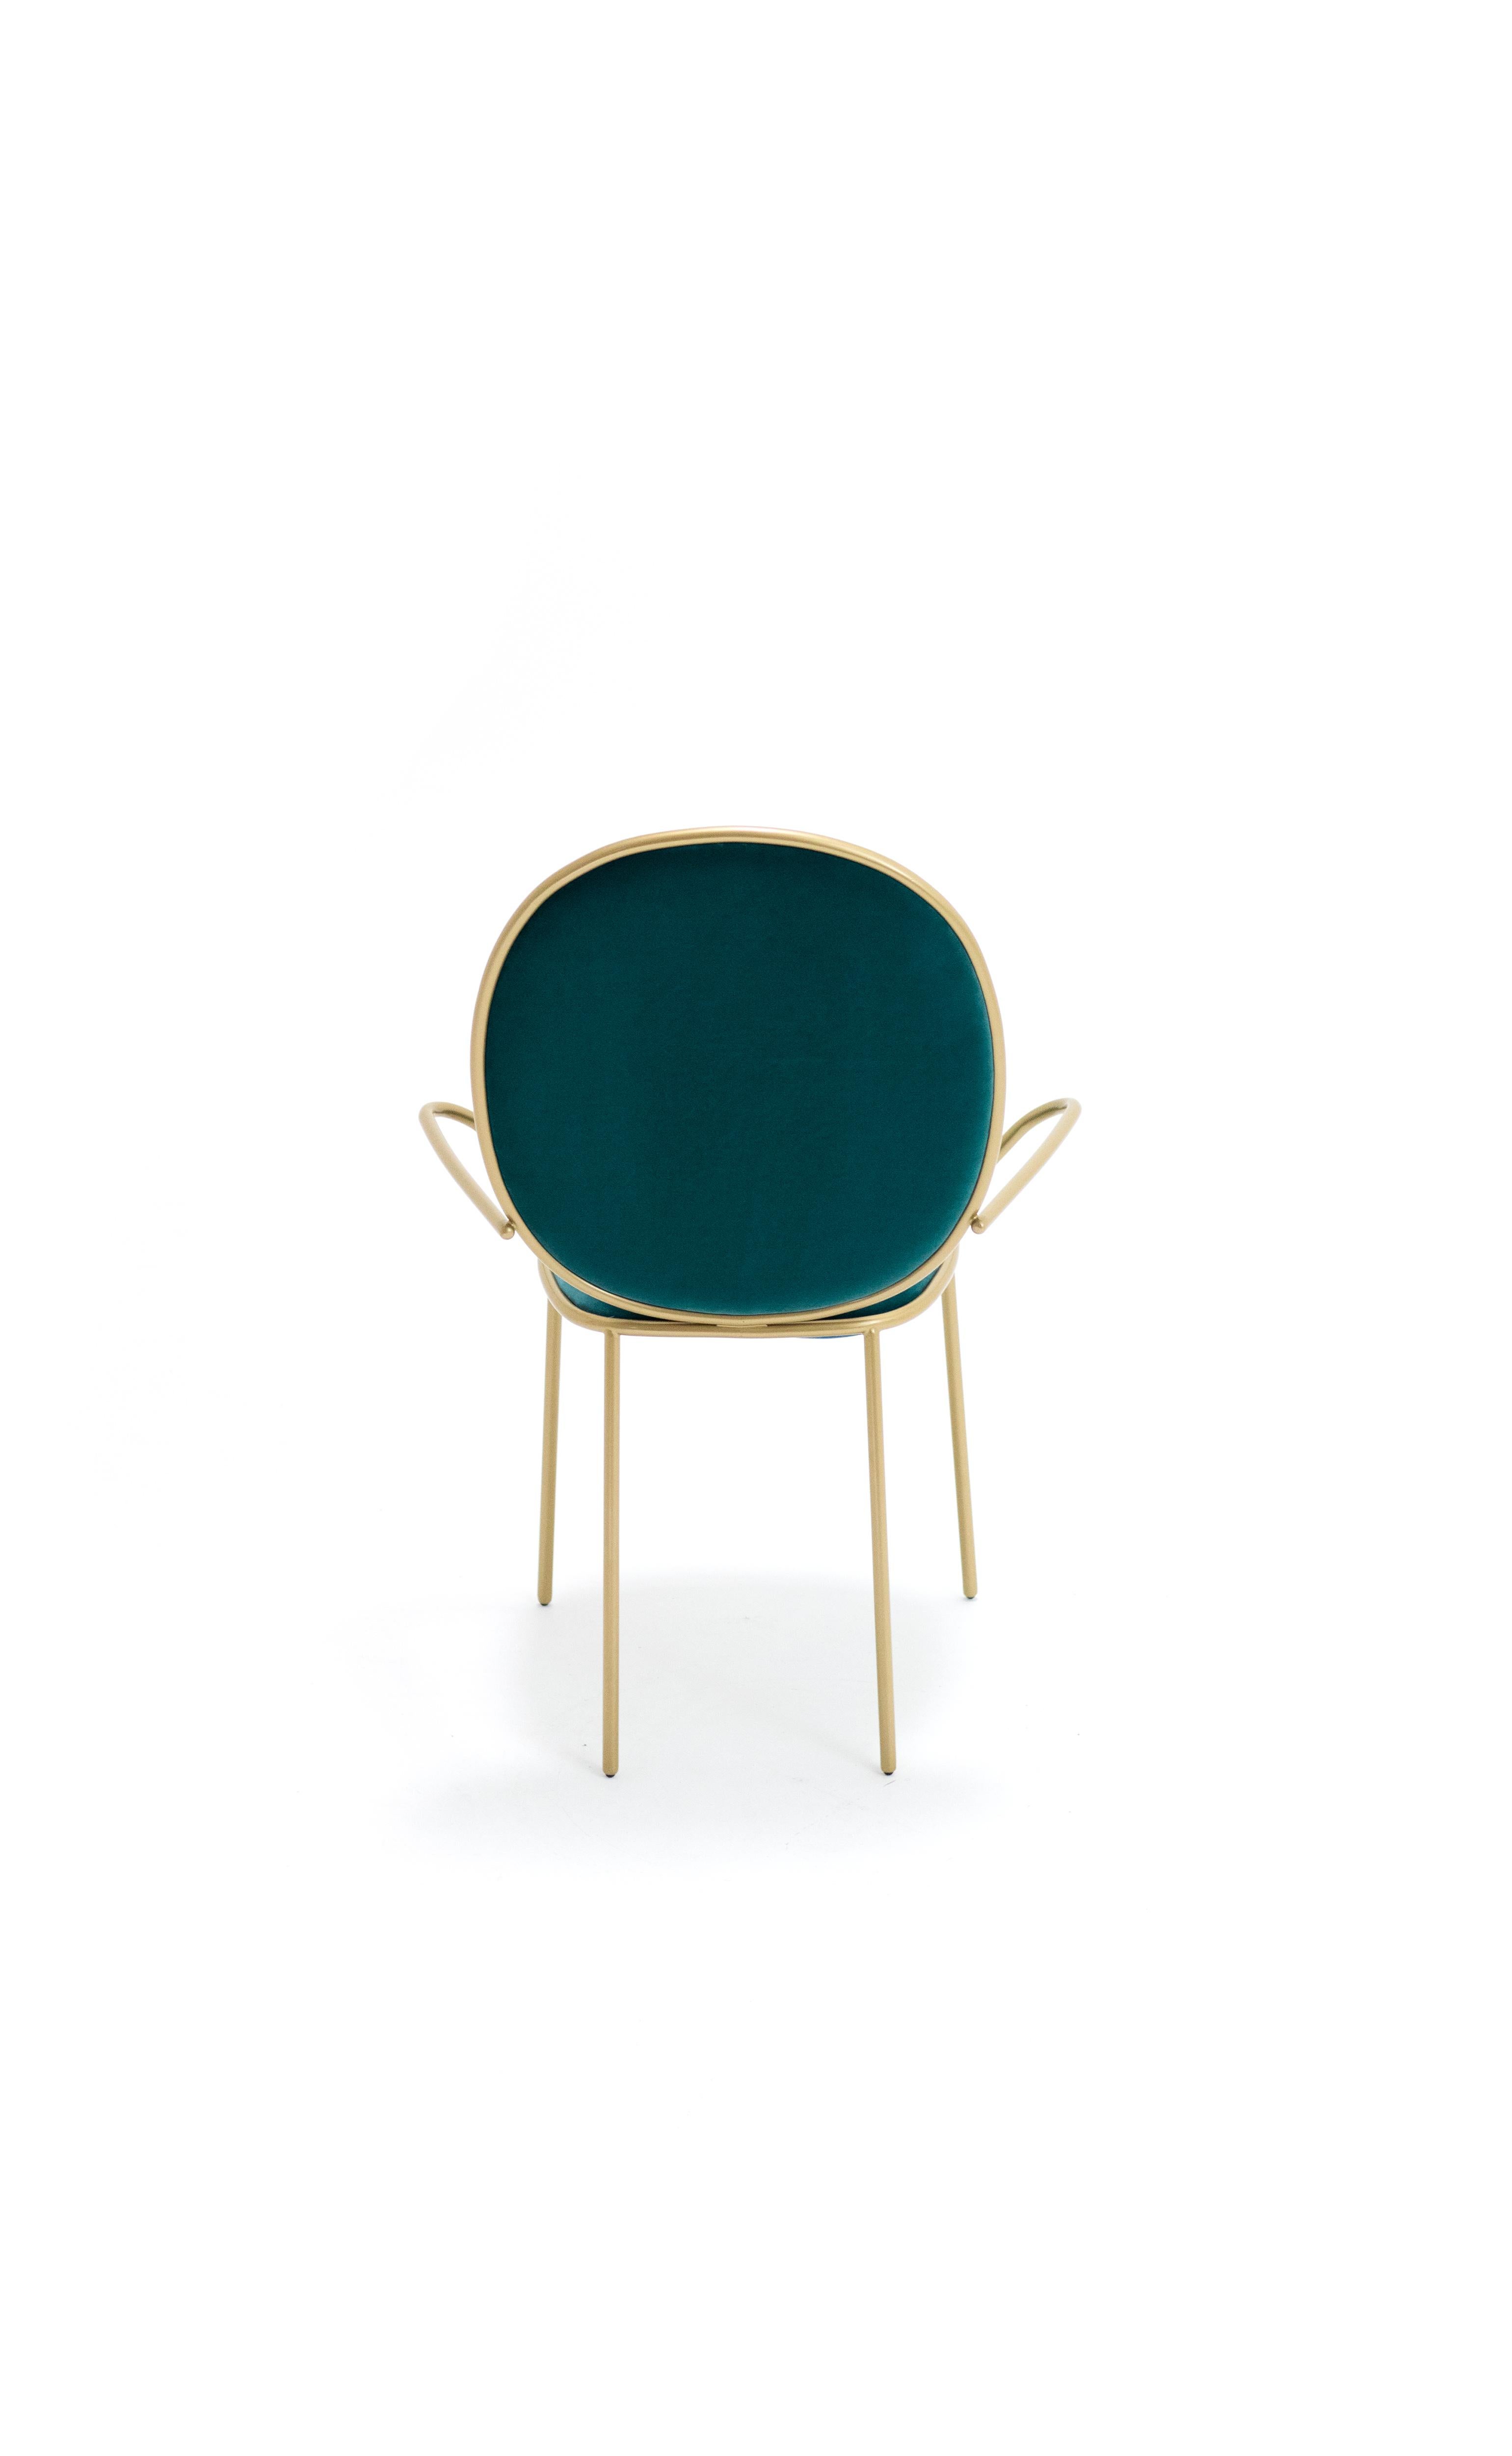 Contemporary Ocean Green Velvet Upholstered Dining Armchair, Stay by Nika Zupanc 1